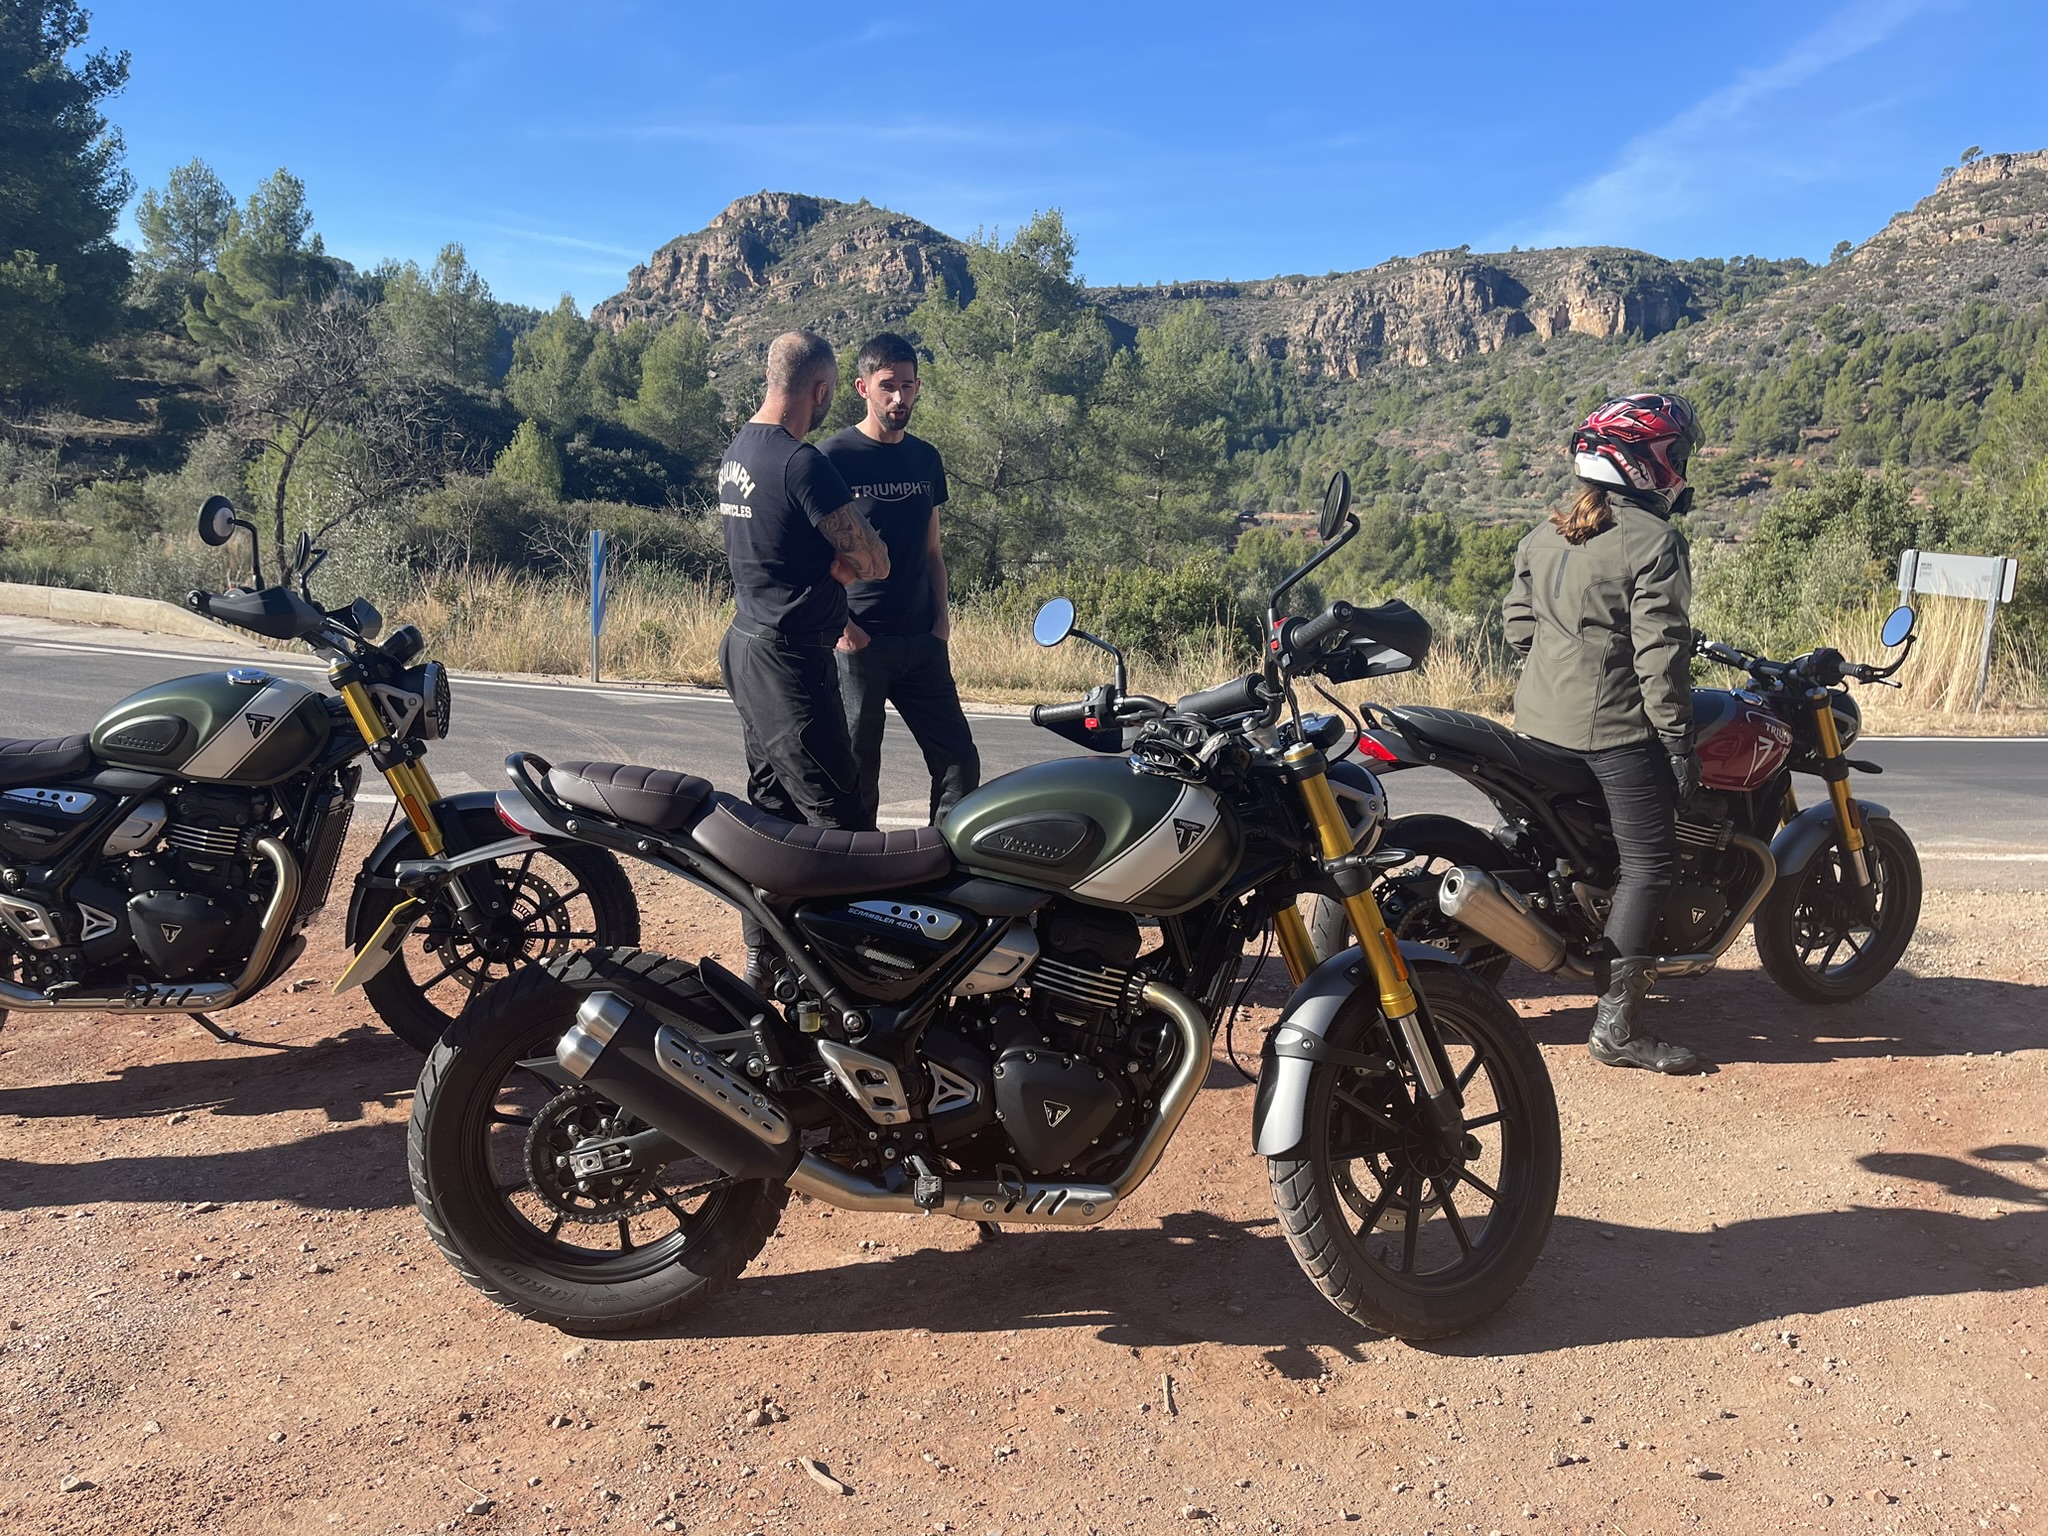 Photo opportunities with the Scrambler and Speed 400